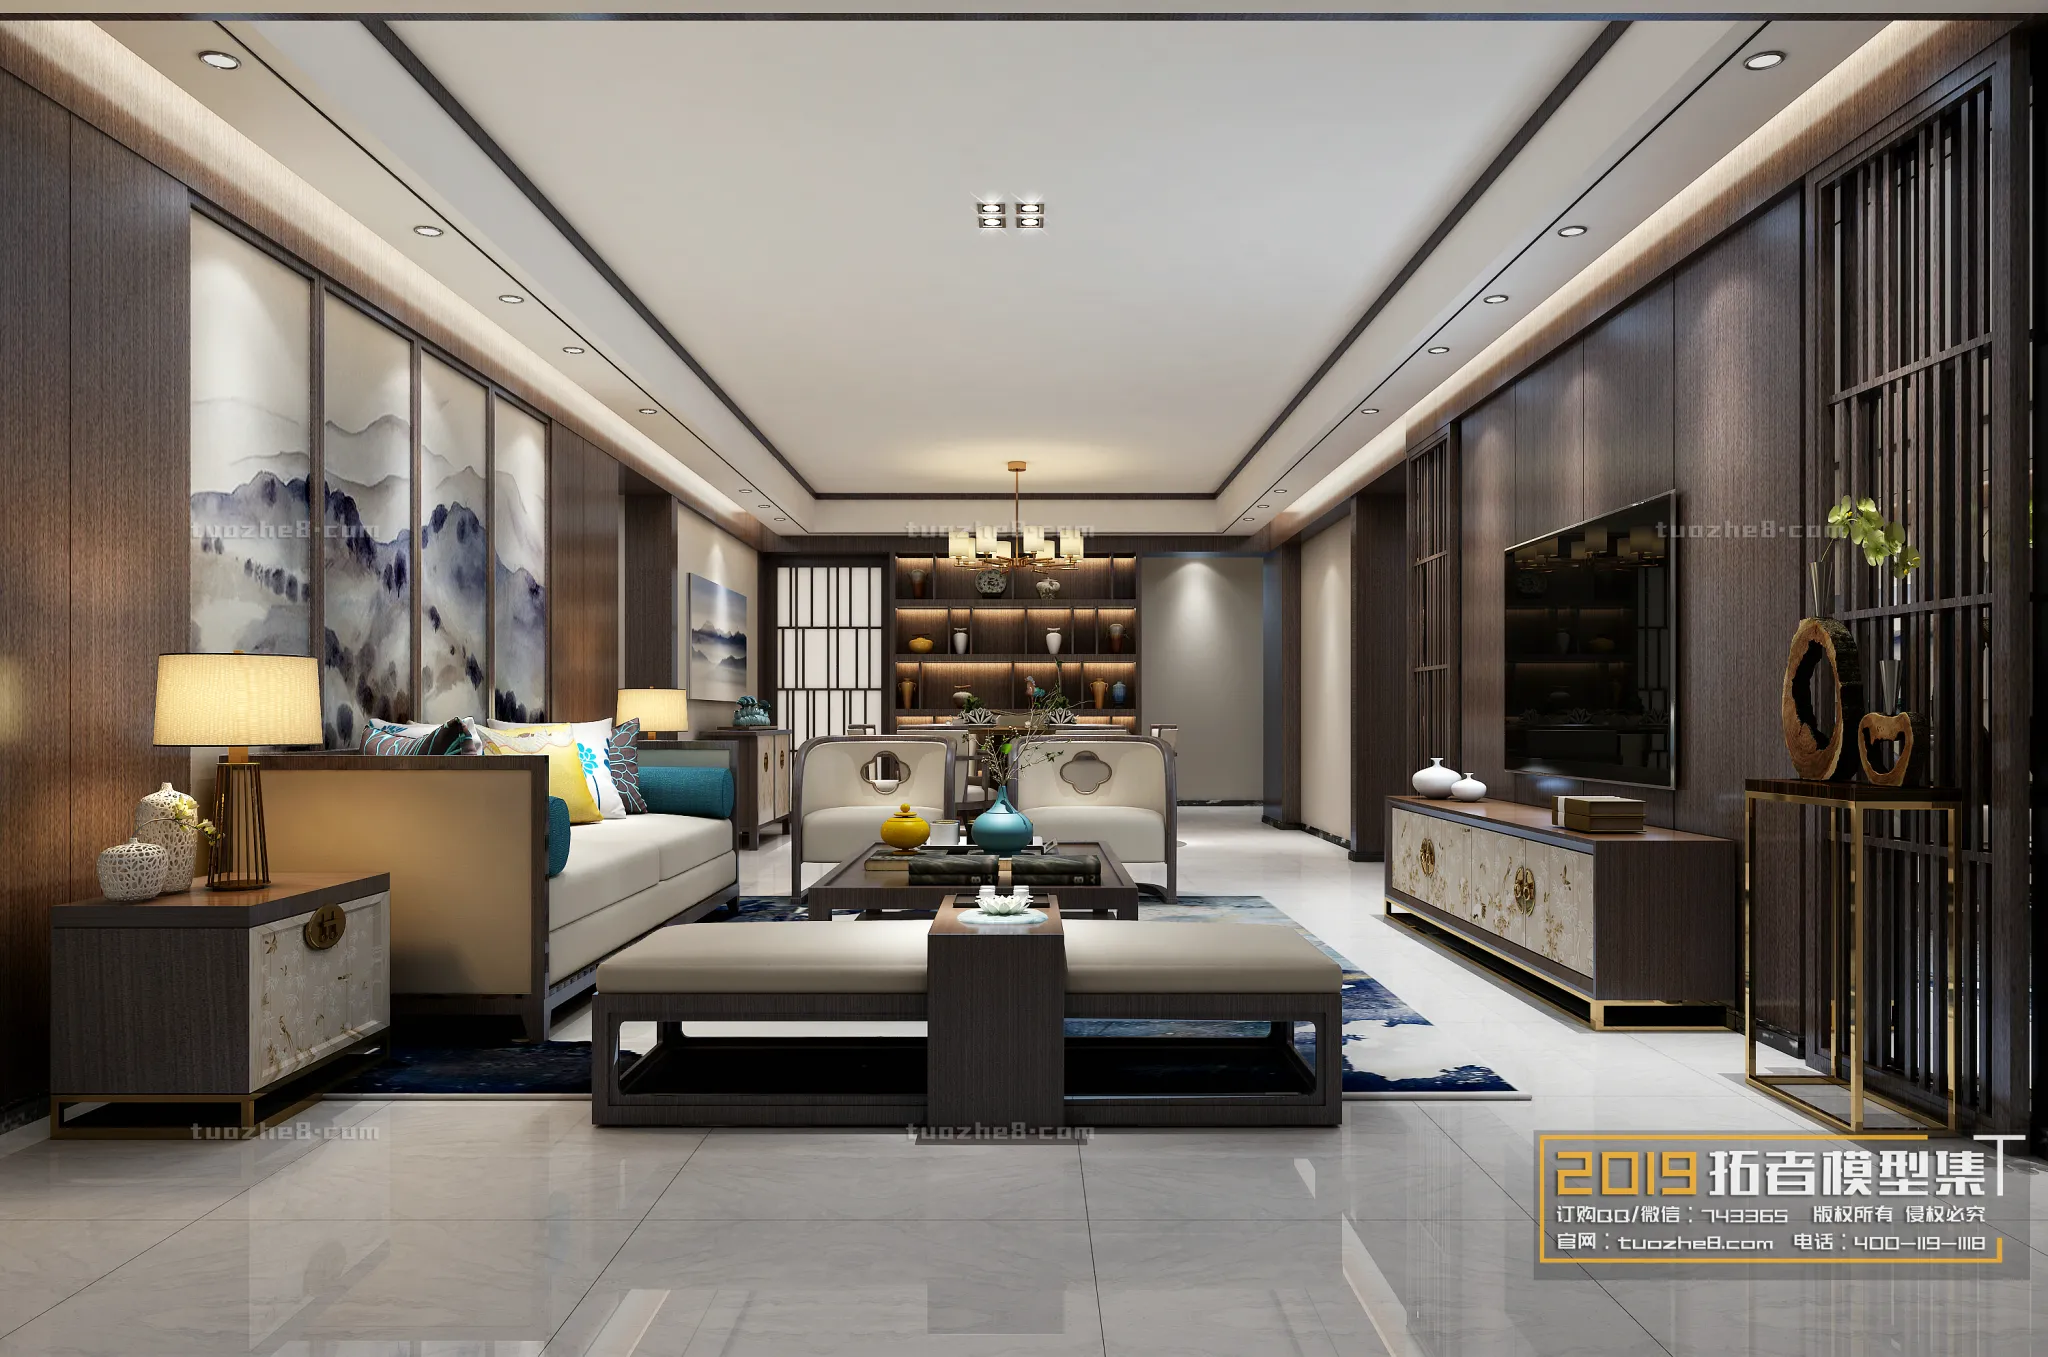 Extension Interior – LINGVING ROOM – CHINESE STYLES – 011